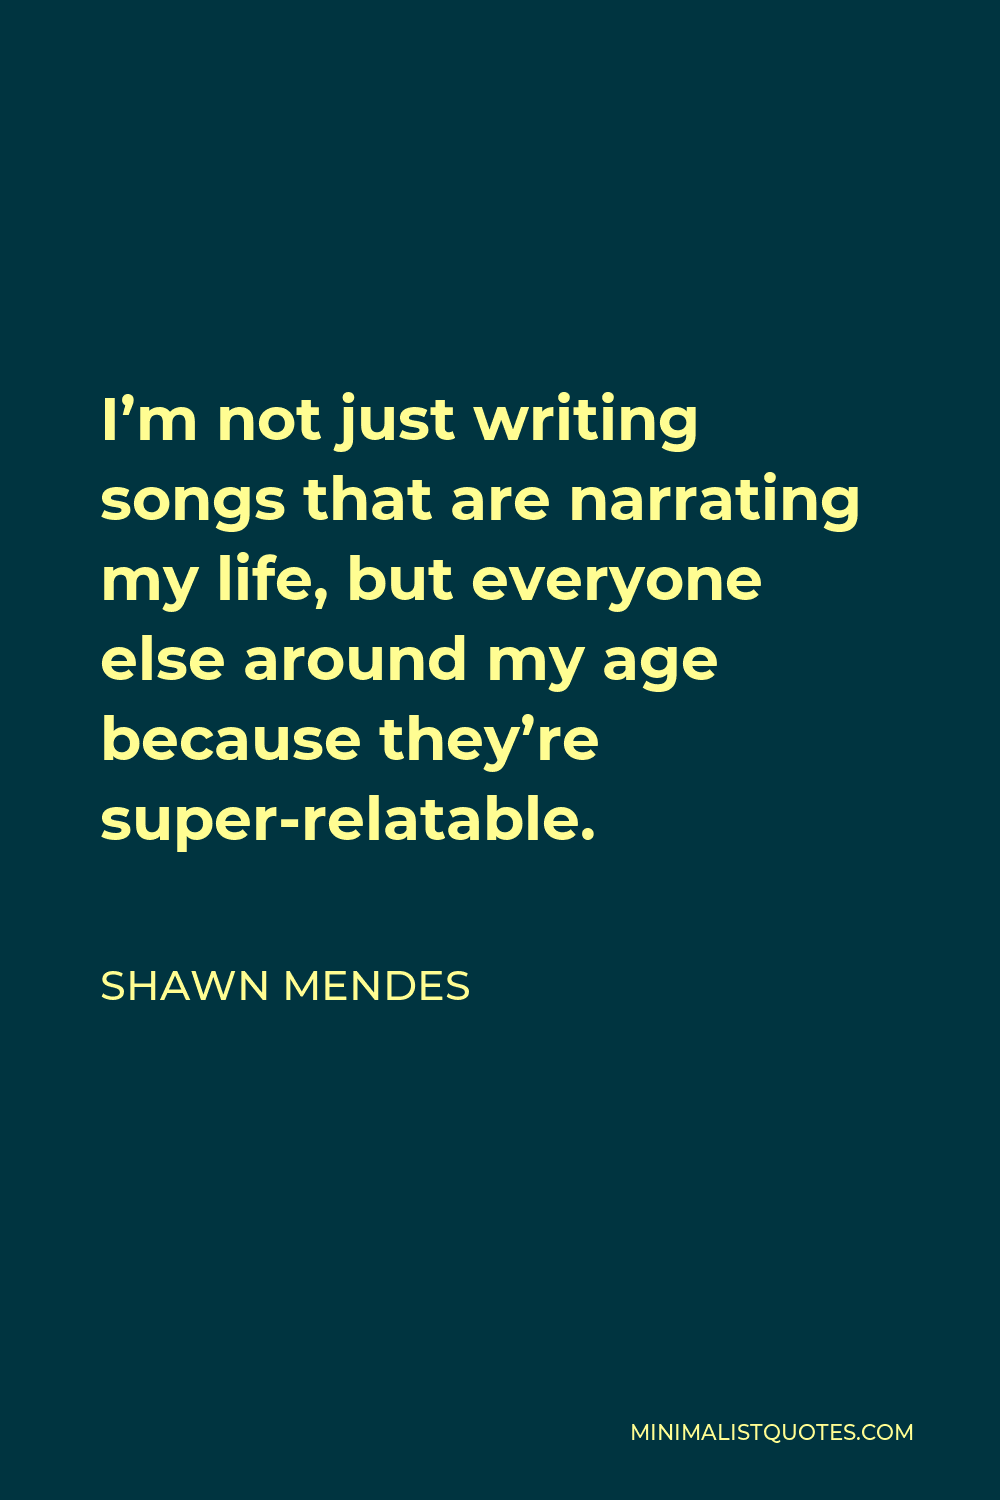 Shawn Mendes Quote - I’m not just writing songs that are narrating my life, but everyone else around my age because they’re super-relatable.